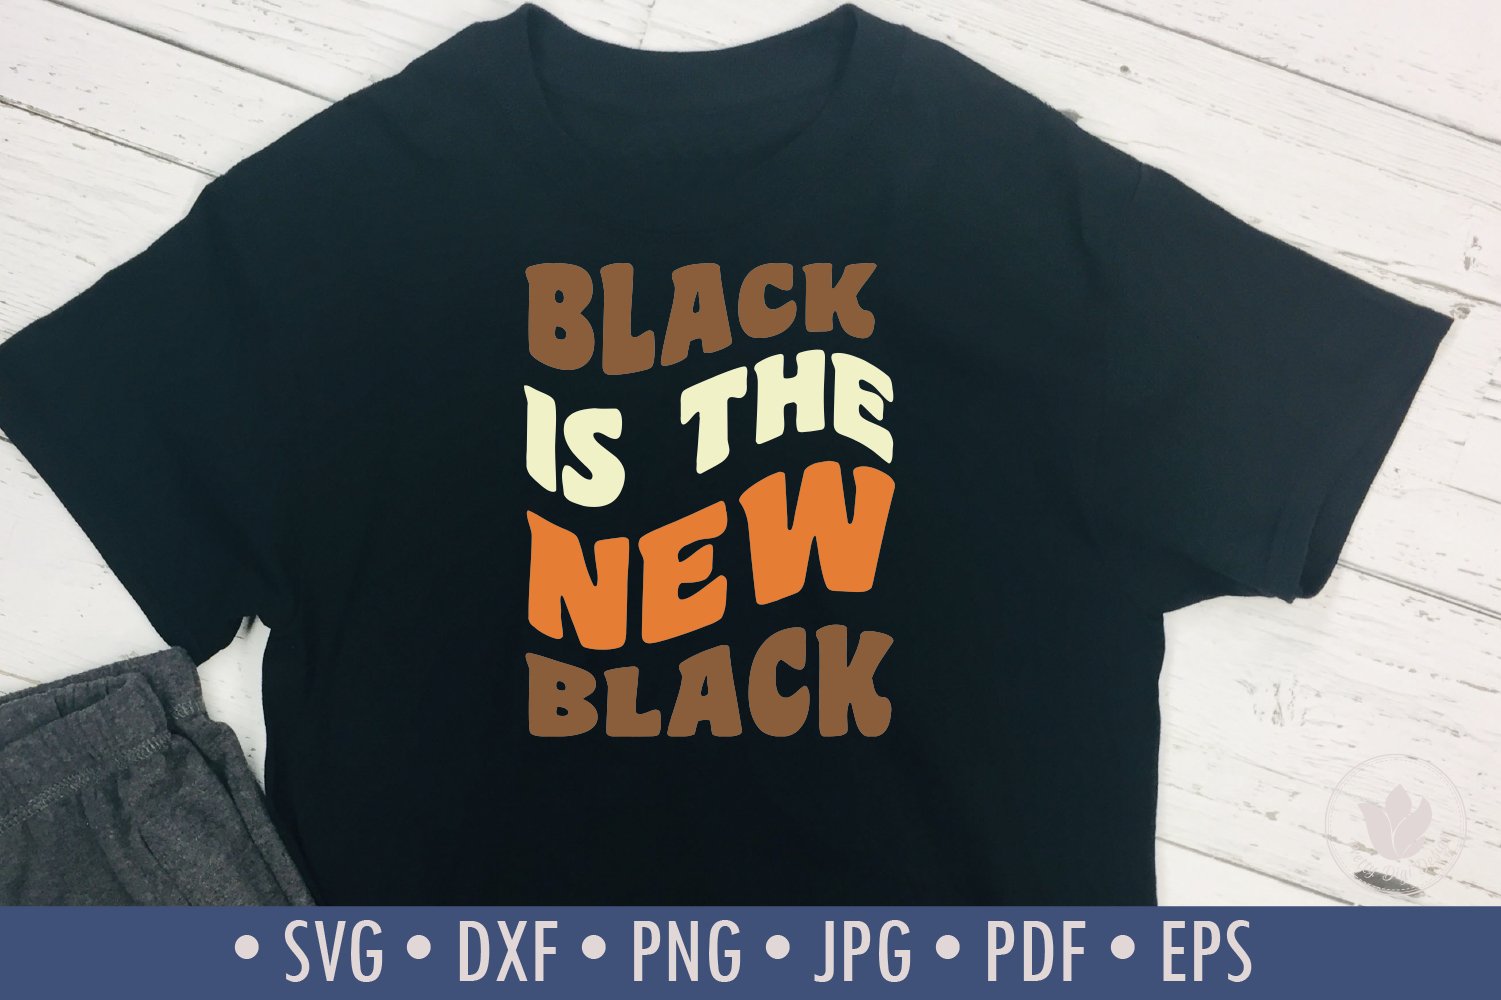 Black T-shirt with a bright print with the word "Black is the new black".